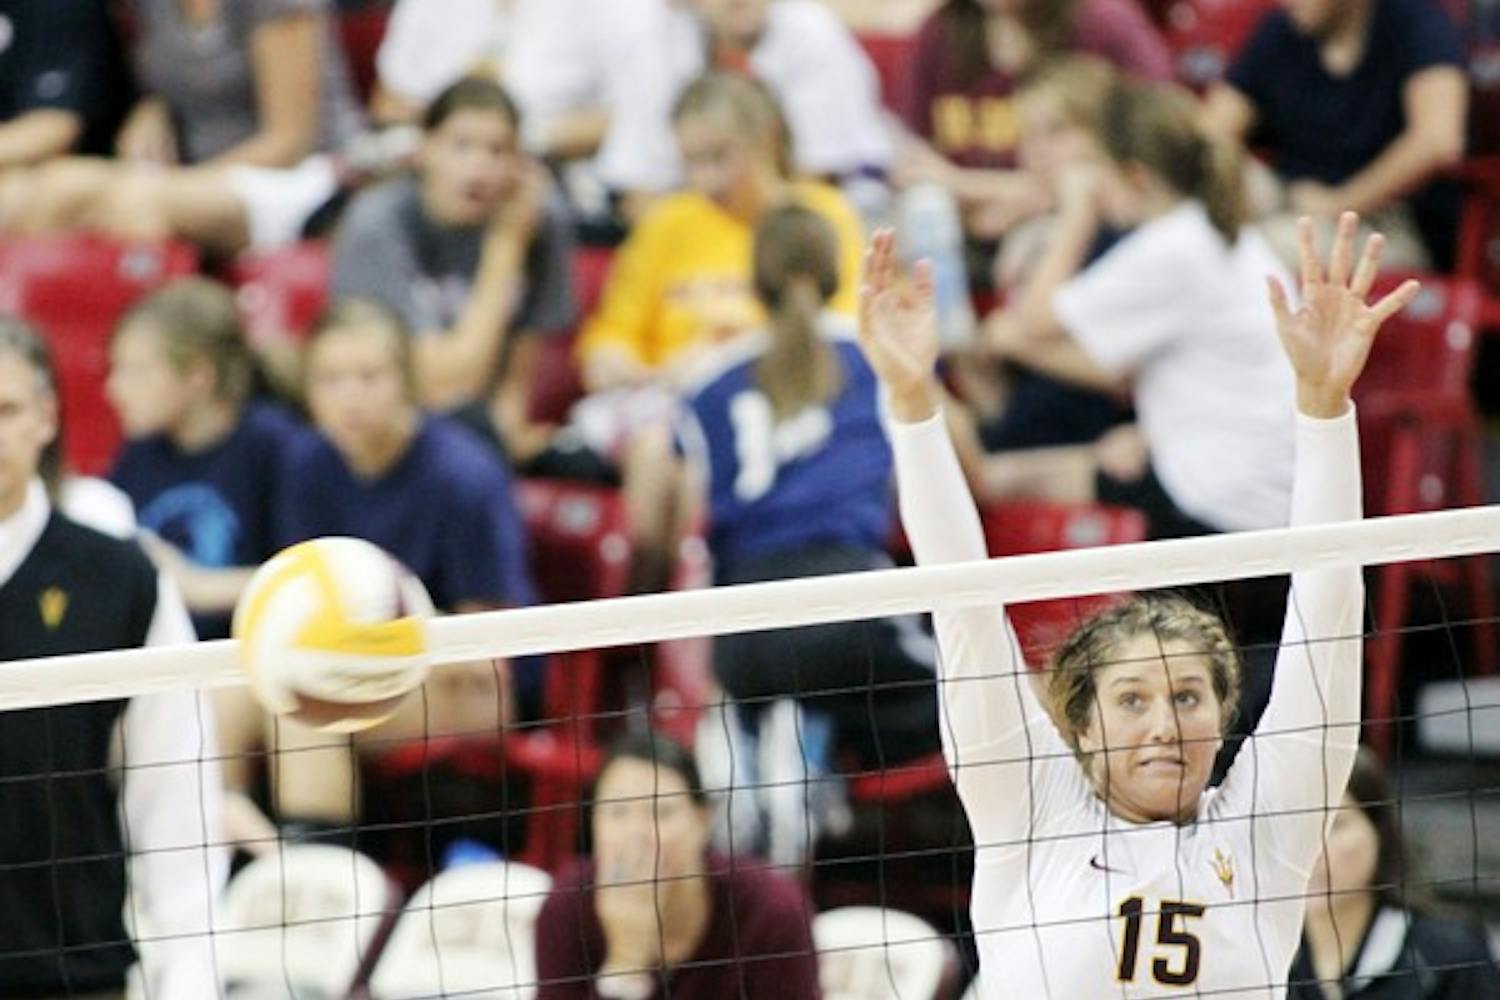 UP HIGH: Redshirt sophomore outside hitter Ashley Kastl extends to stop the ball during the Sun Devils’ 3-2 loss to Washington State on Sept. 23. Kastl has been a bright spot for the ASU volleyball team despite their recent struggles. (Photo by Rosie Gochnour)